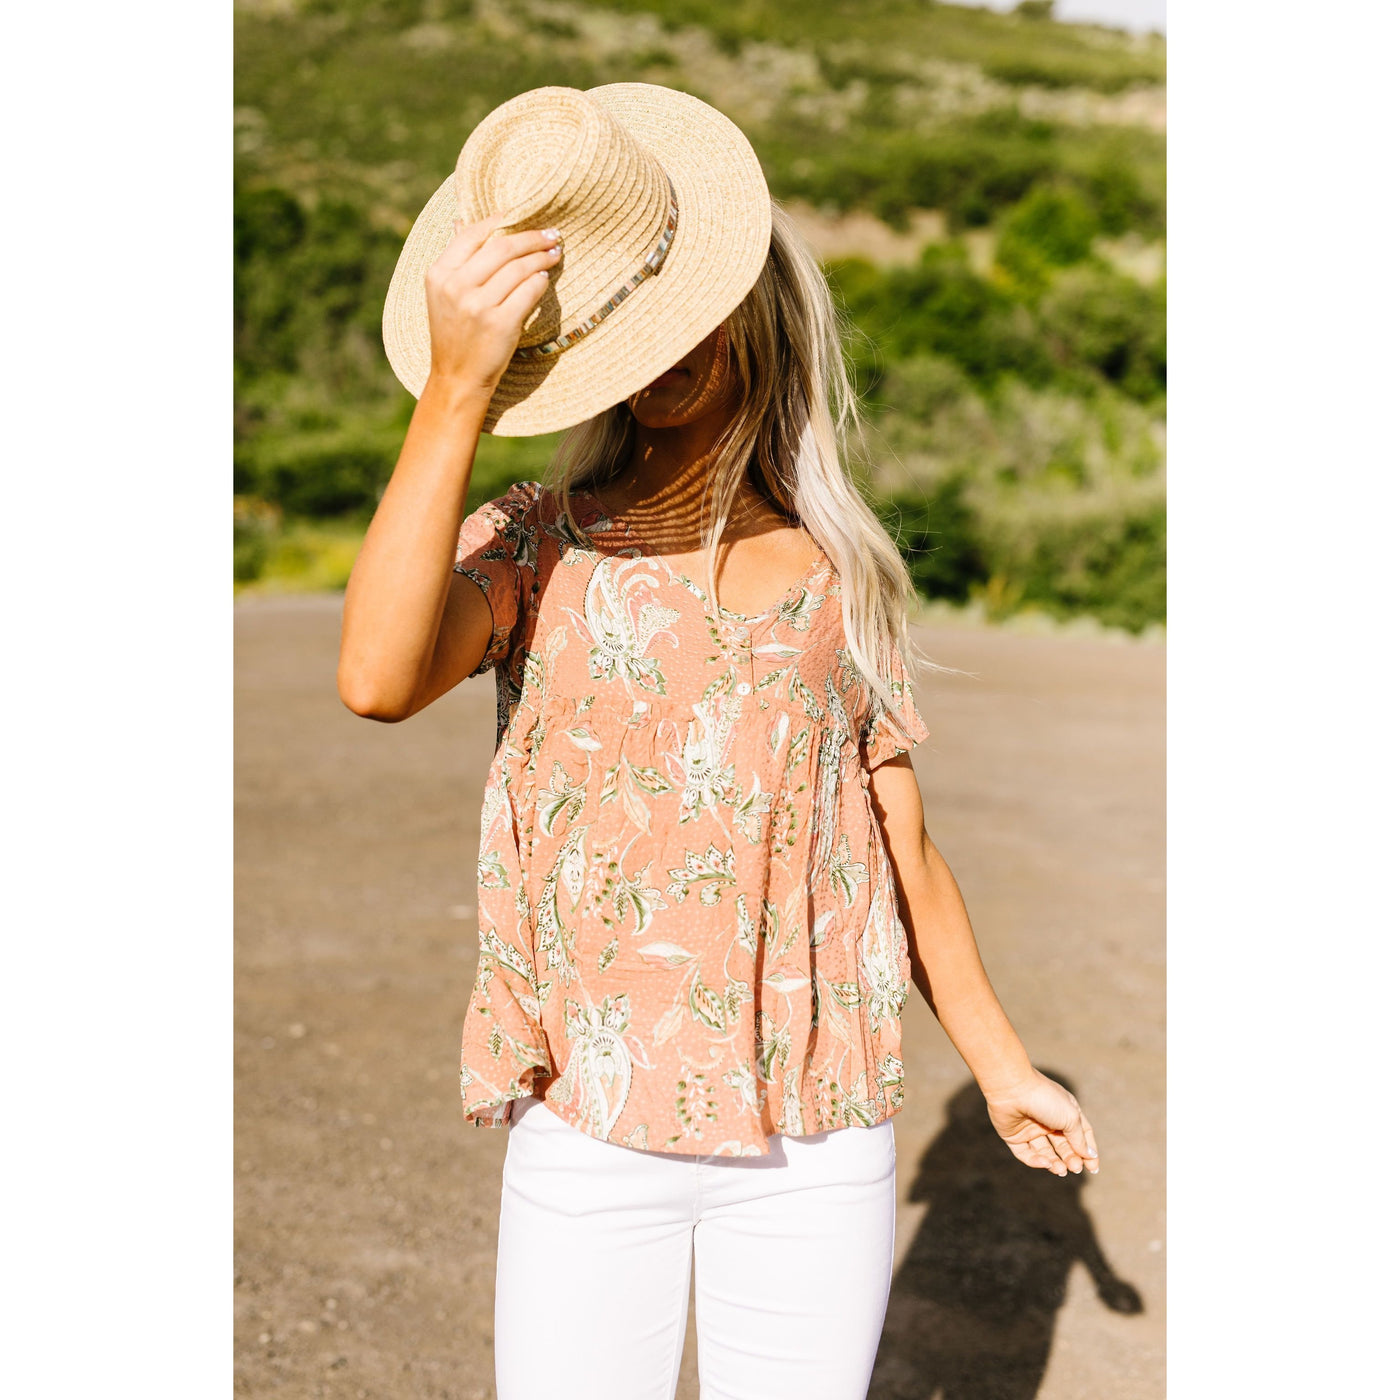 Bliss Swiss Dot Floral Top In Apricot-W Top-Graceful & Chic Boutique, Family Clothing Store in Waxahachie, Texas